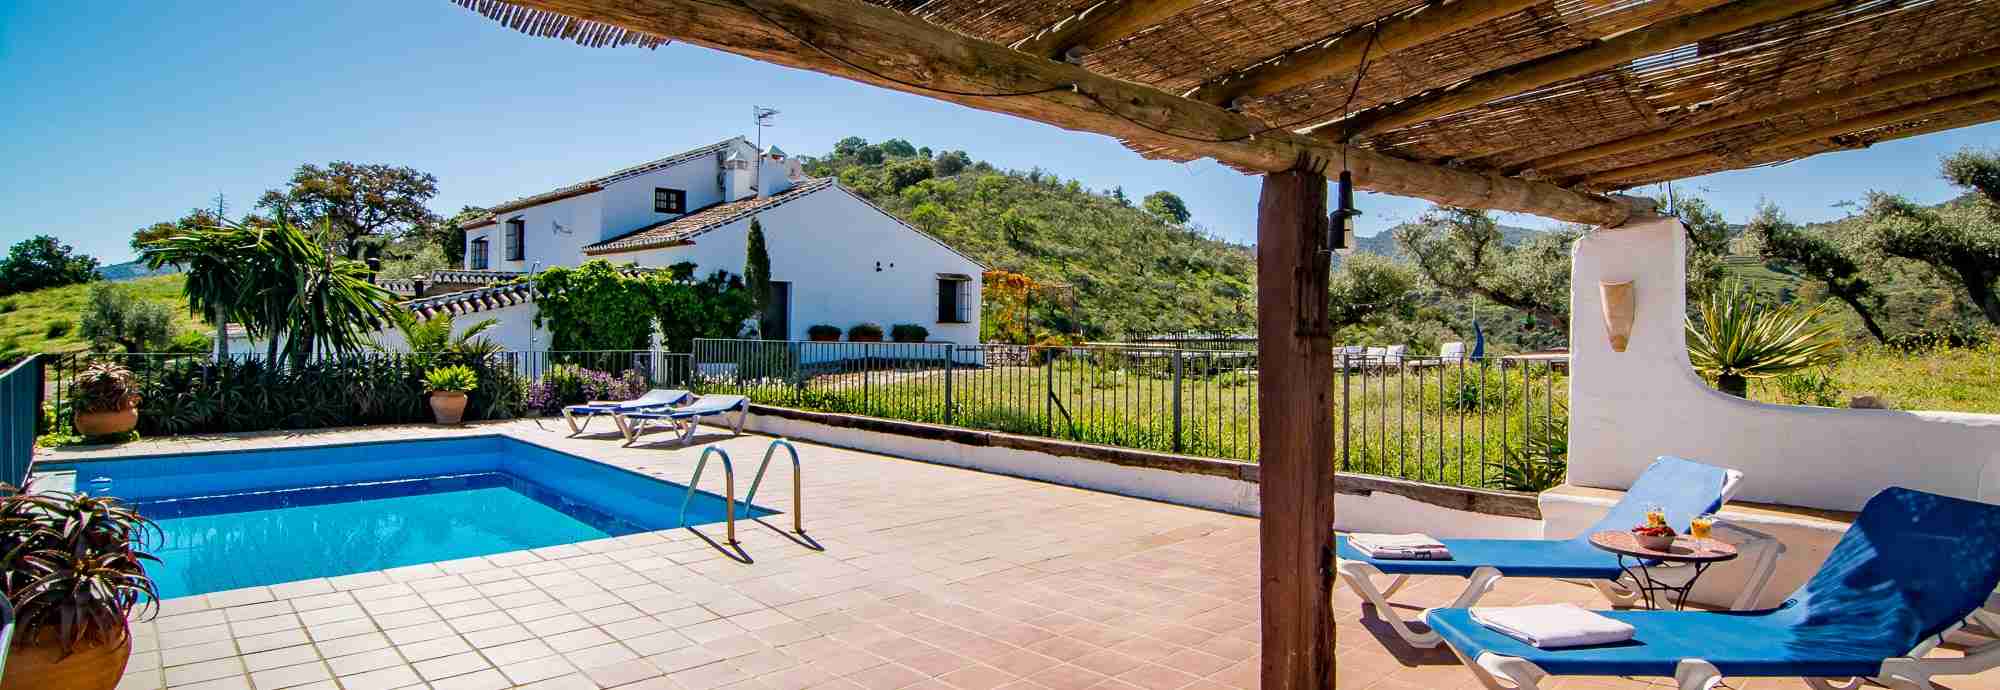 Splendid traditional Andalucia villa with pool and Bronze Age caves